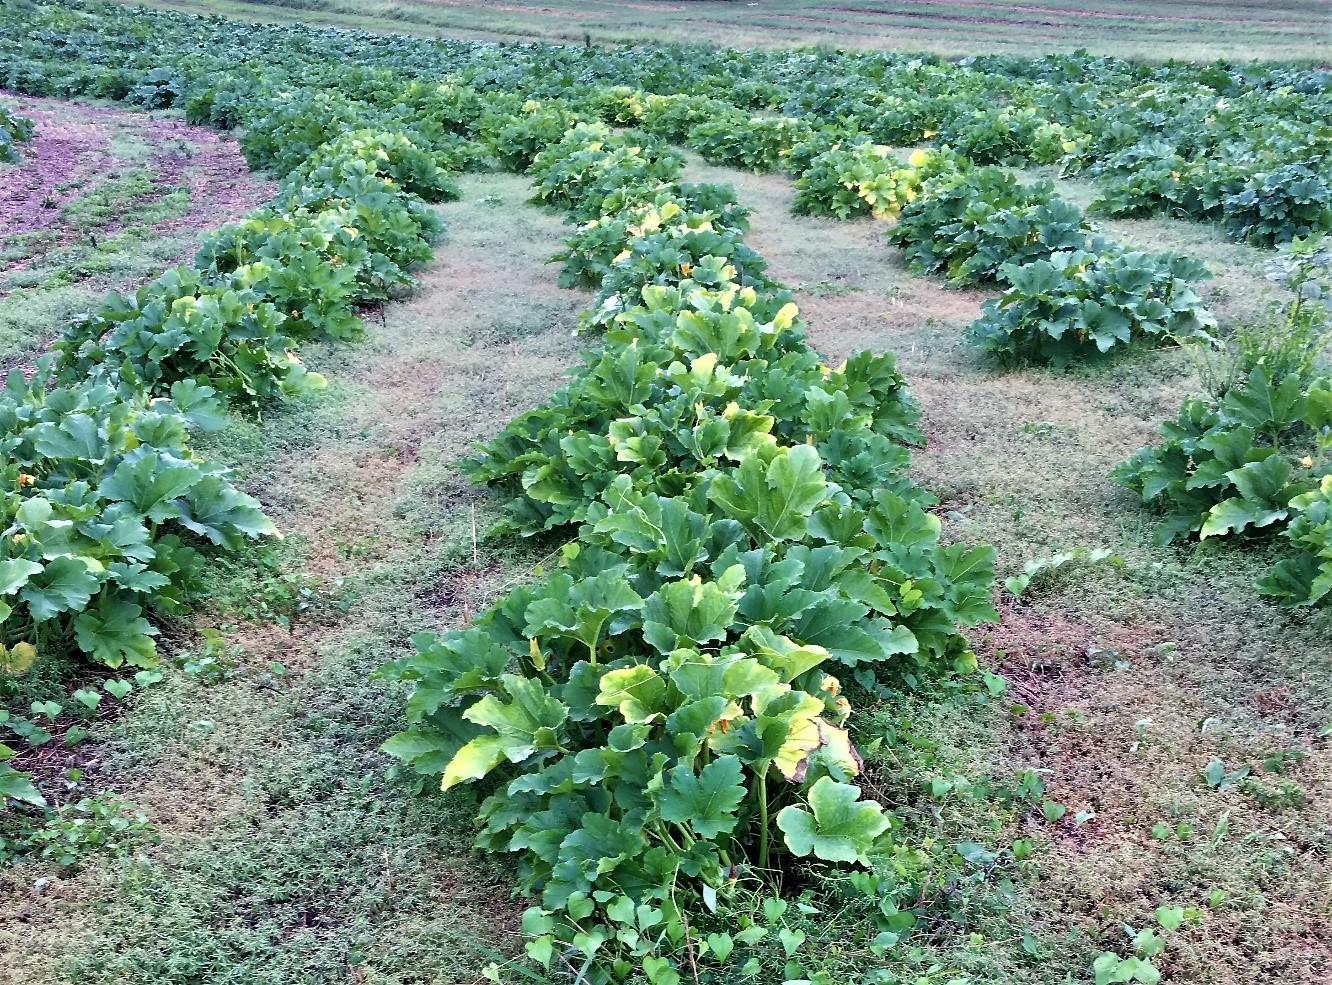 Pumpkins with bright yellow leaves damaged from squash vine borer